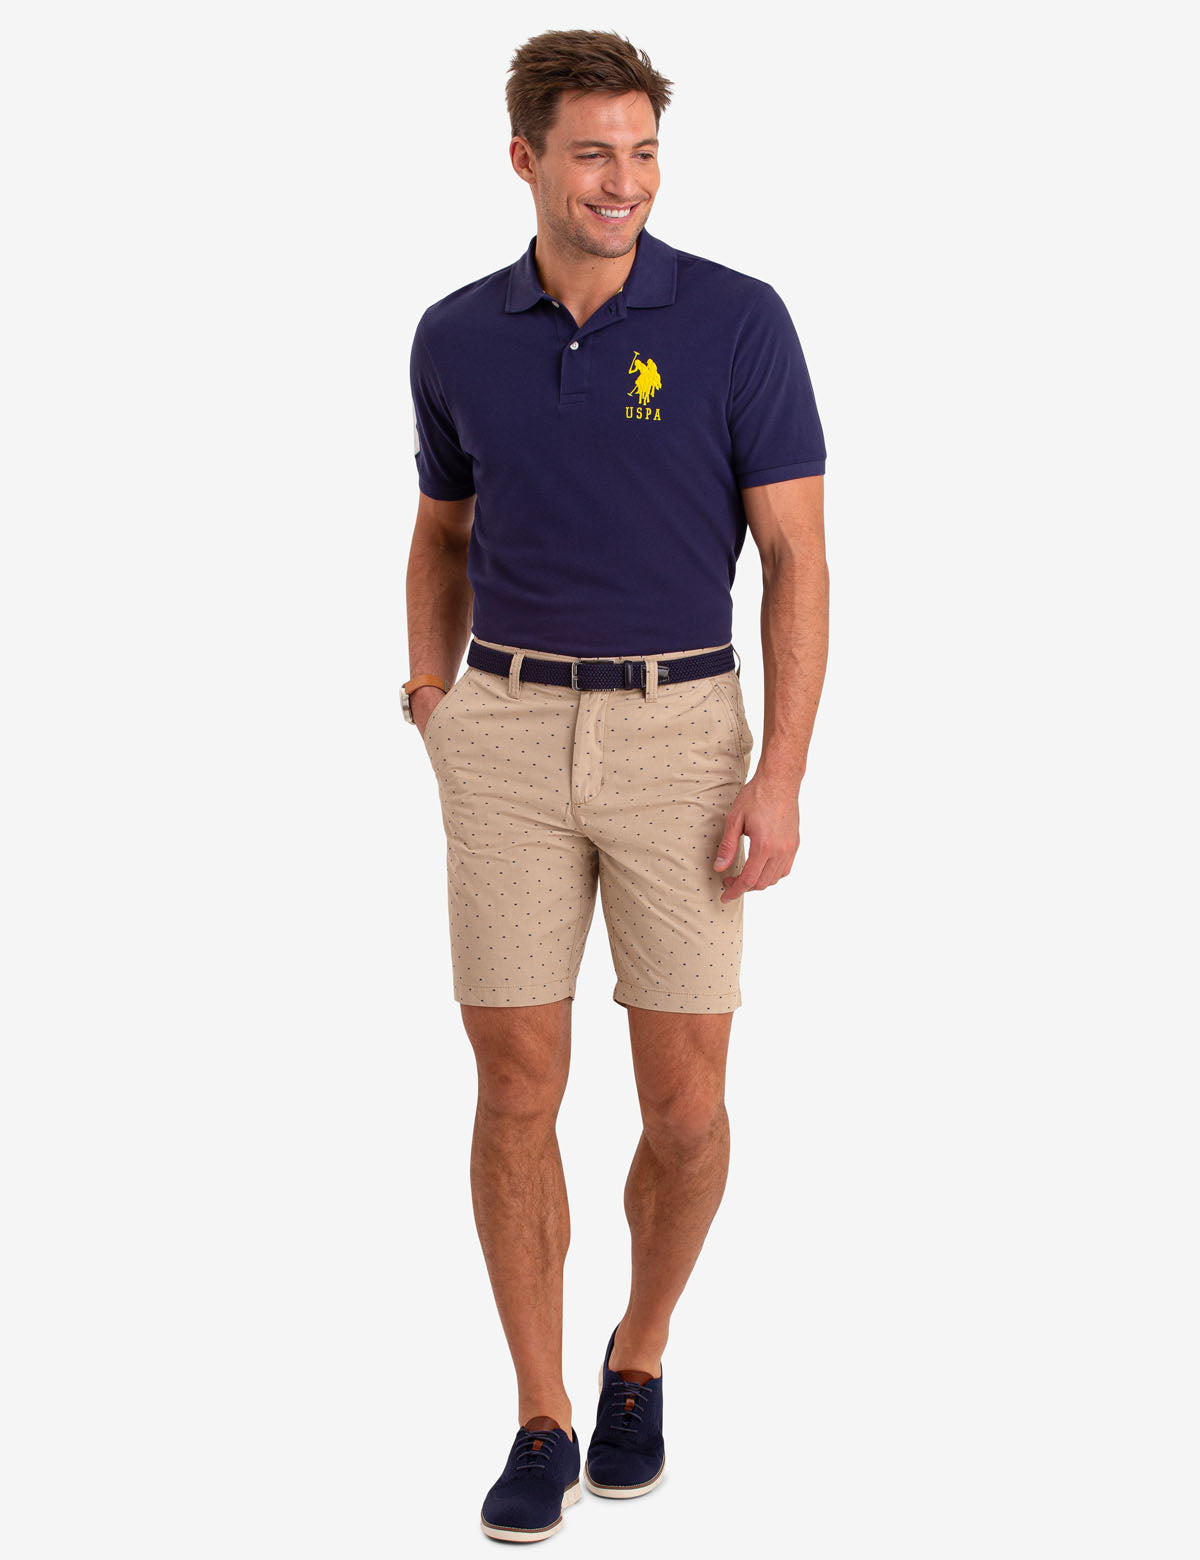 polo and shorts